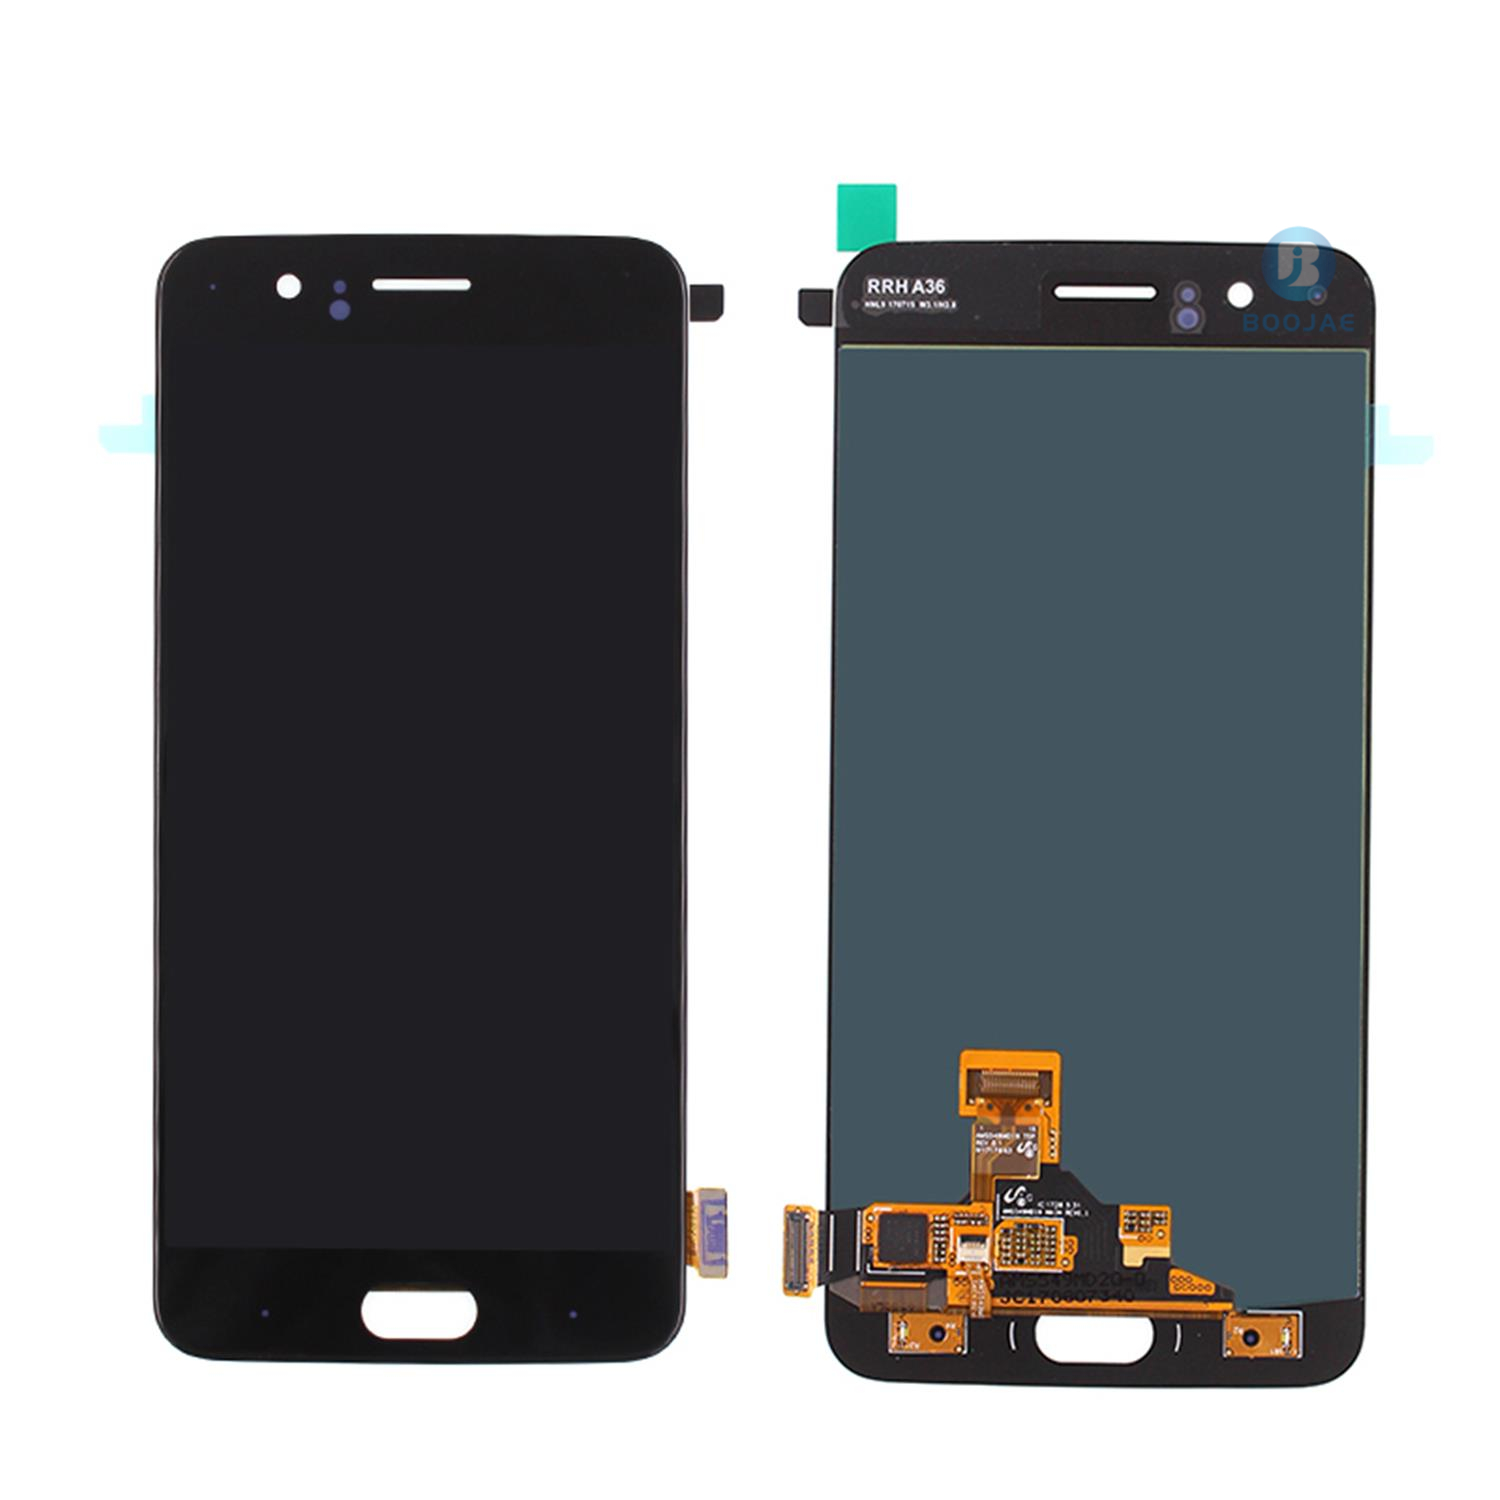 Oneplus 5 LCD Screen Display, Lcd Assembly Replacement